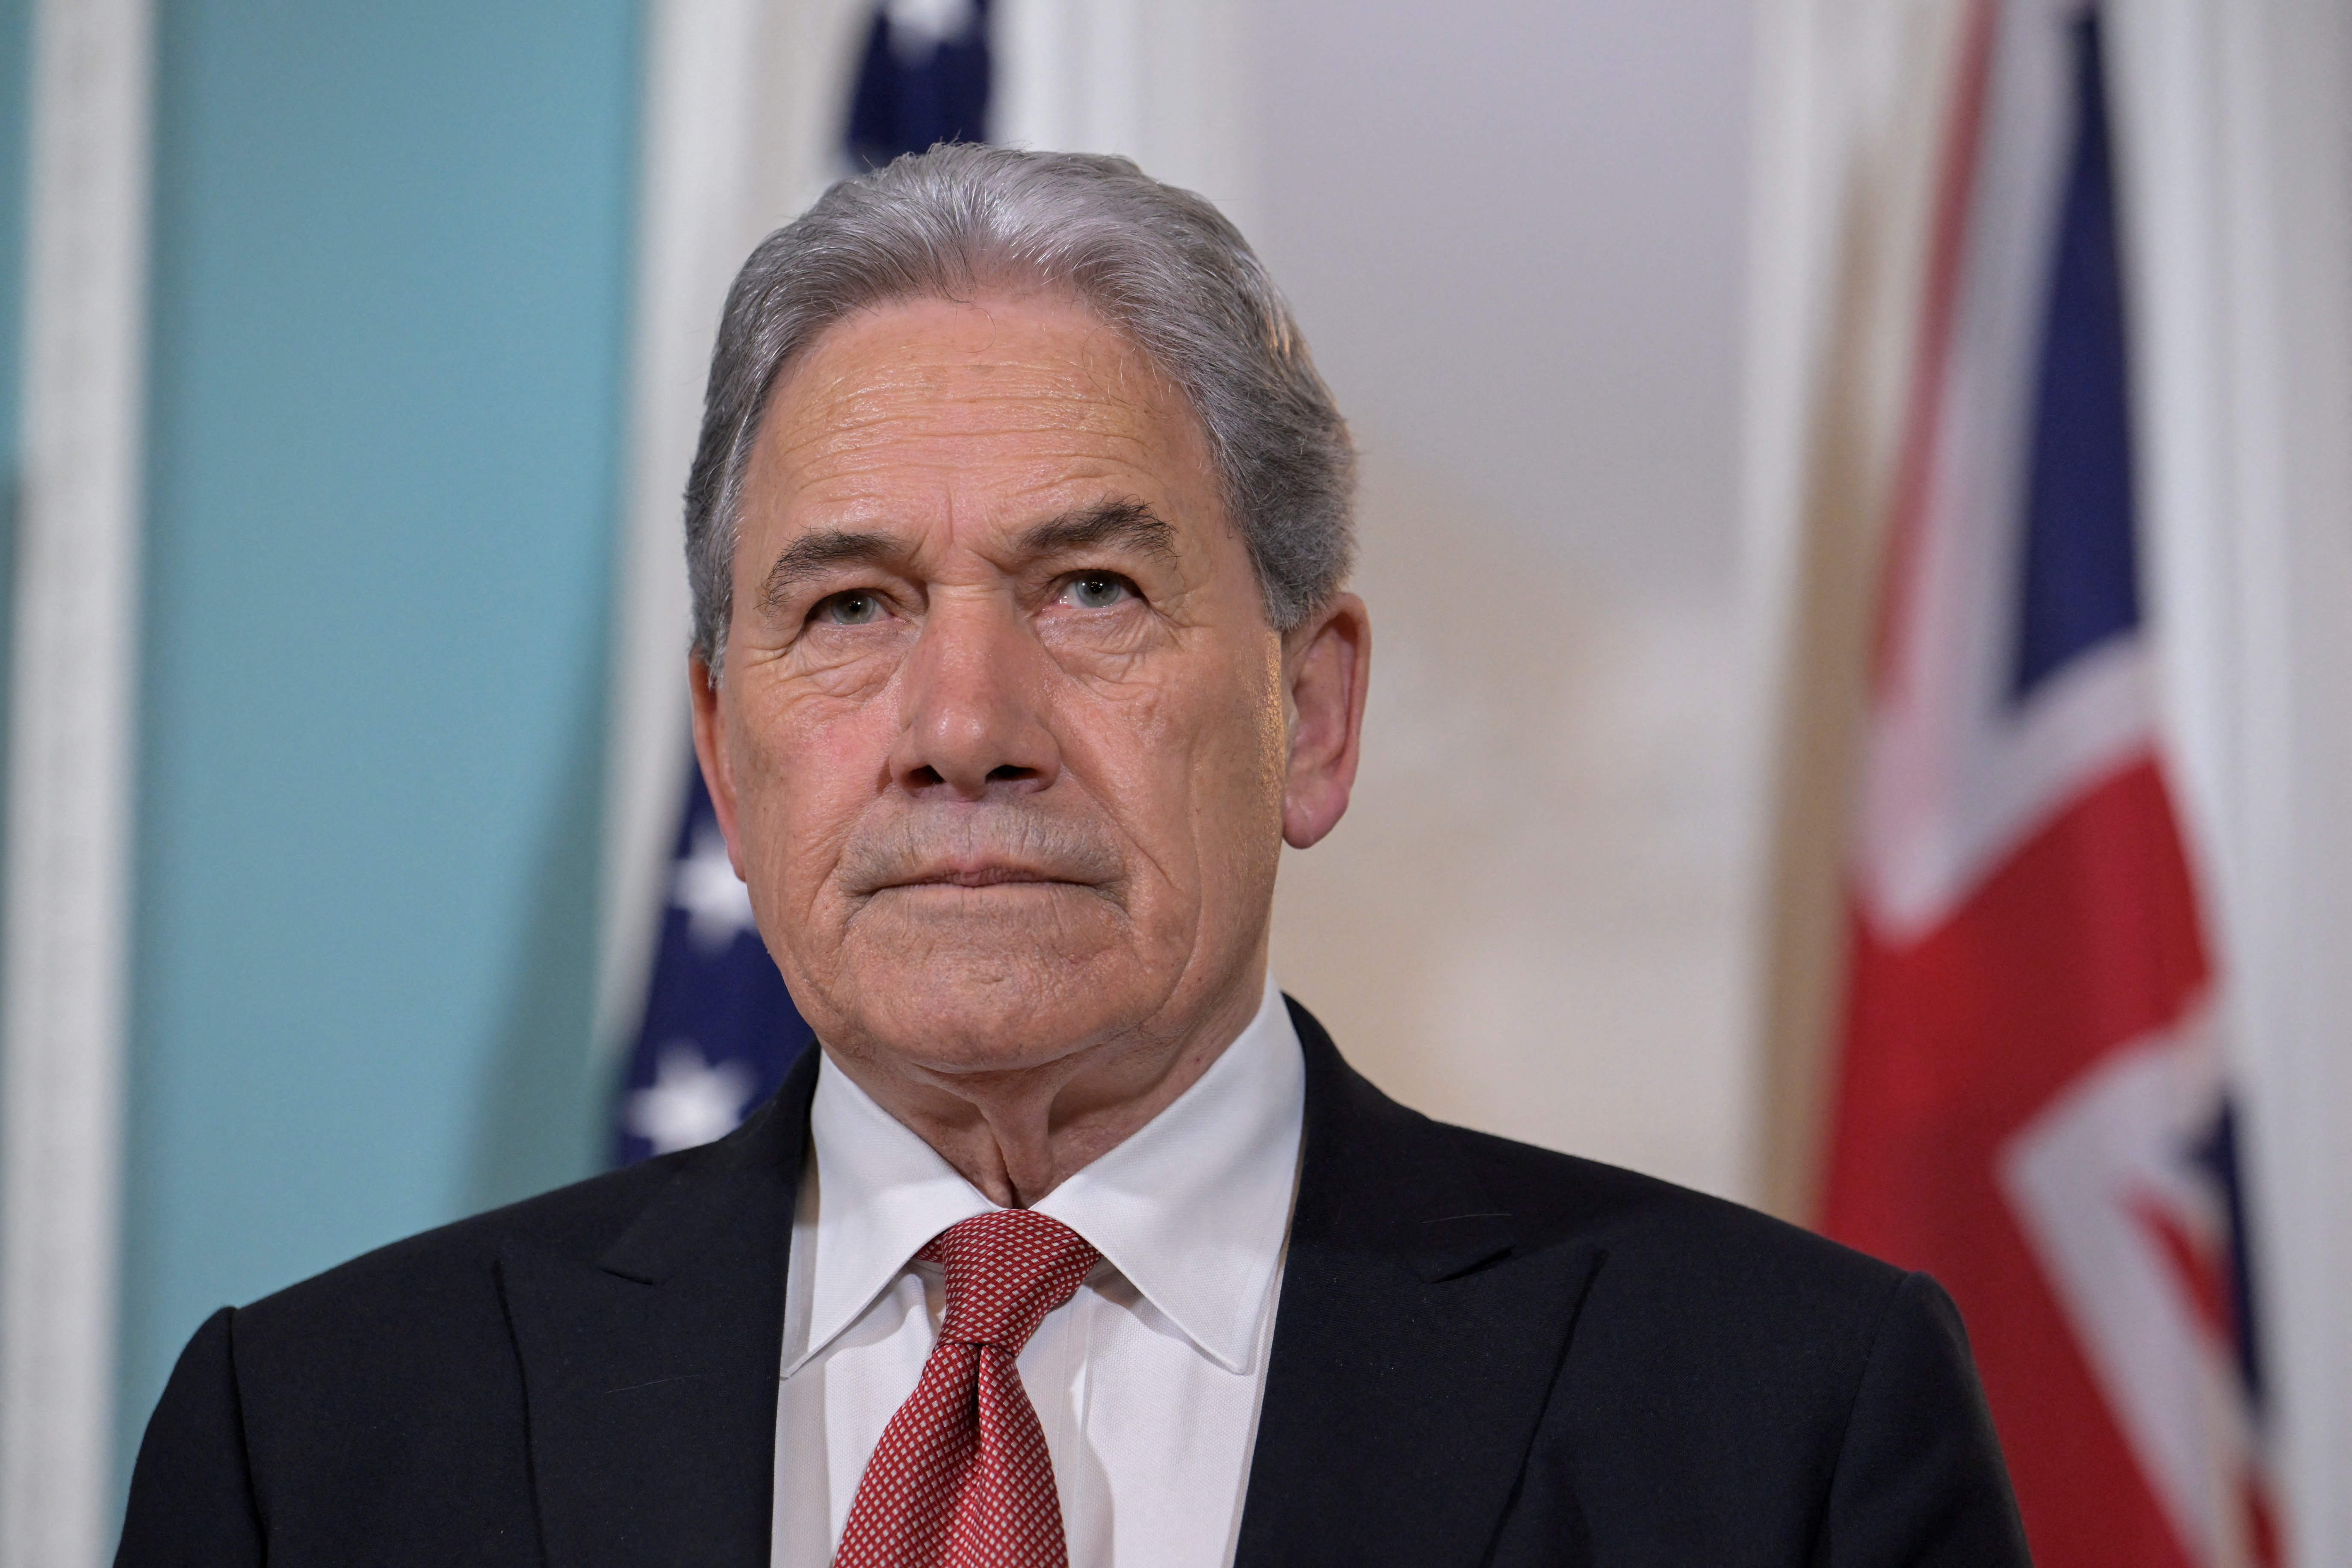 New Zealand Foreign Minister Winston Peters at the U.S. State Department in Washington